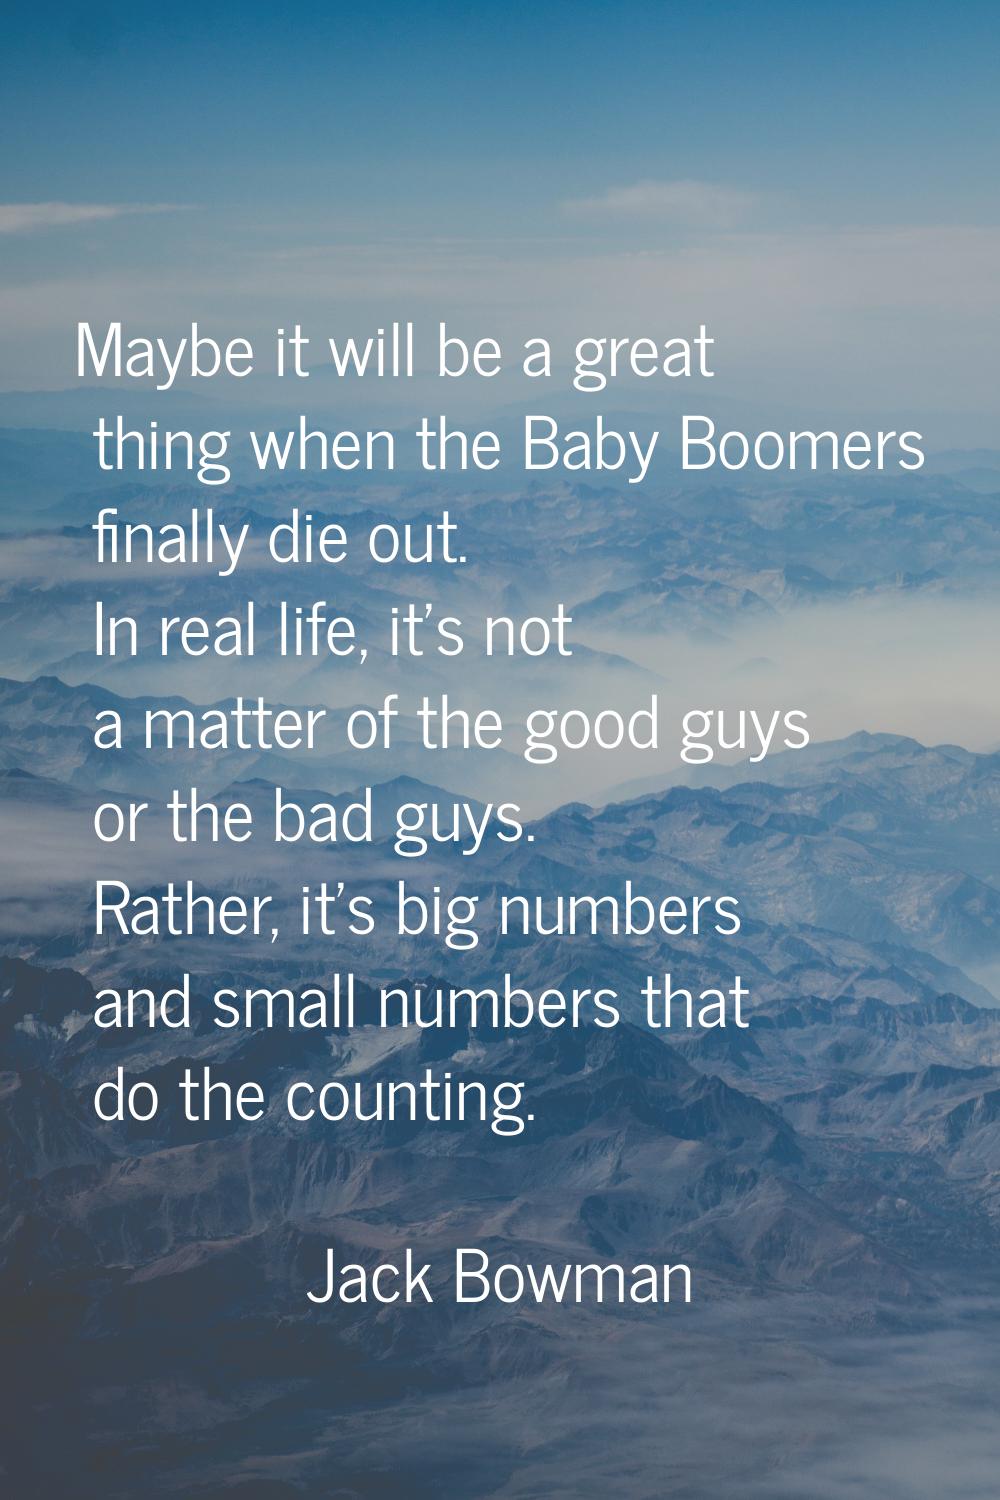 Maybe it will be a great thing when the Baby Boomers finally die out. In real life, it's not a matt